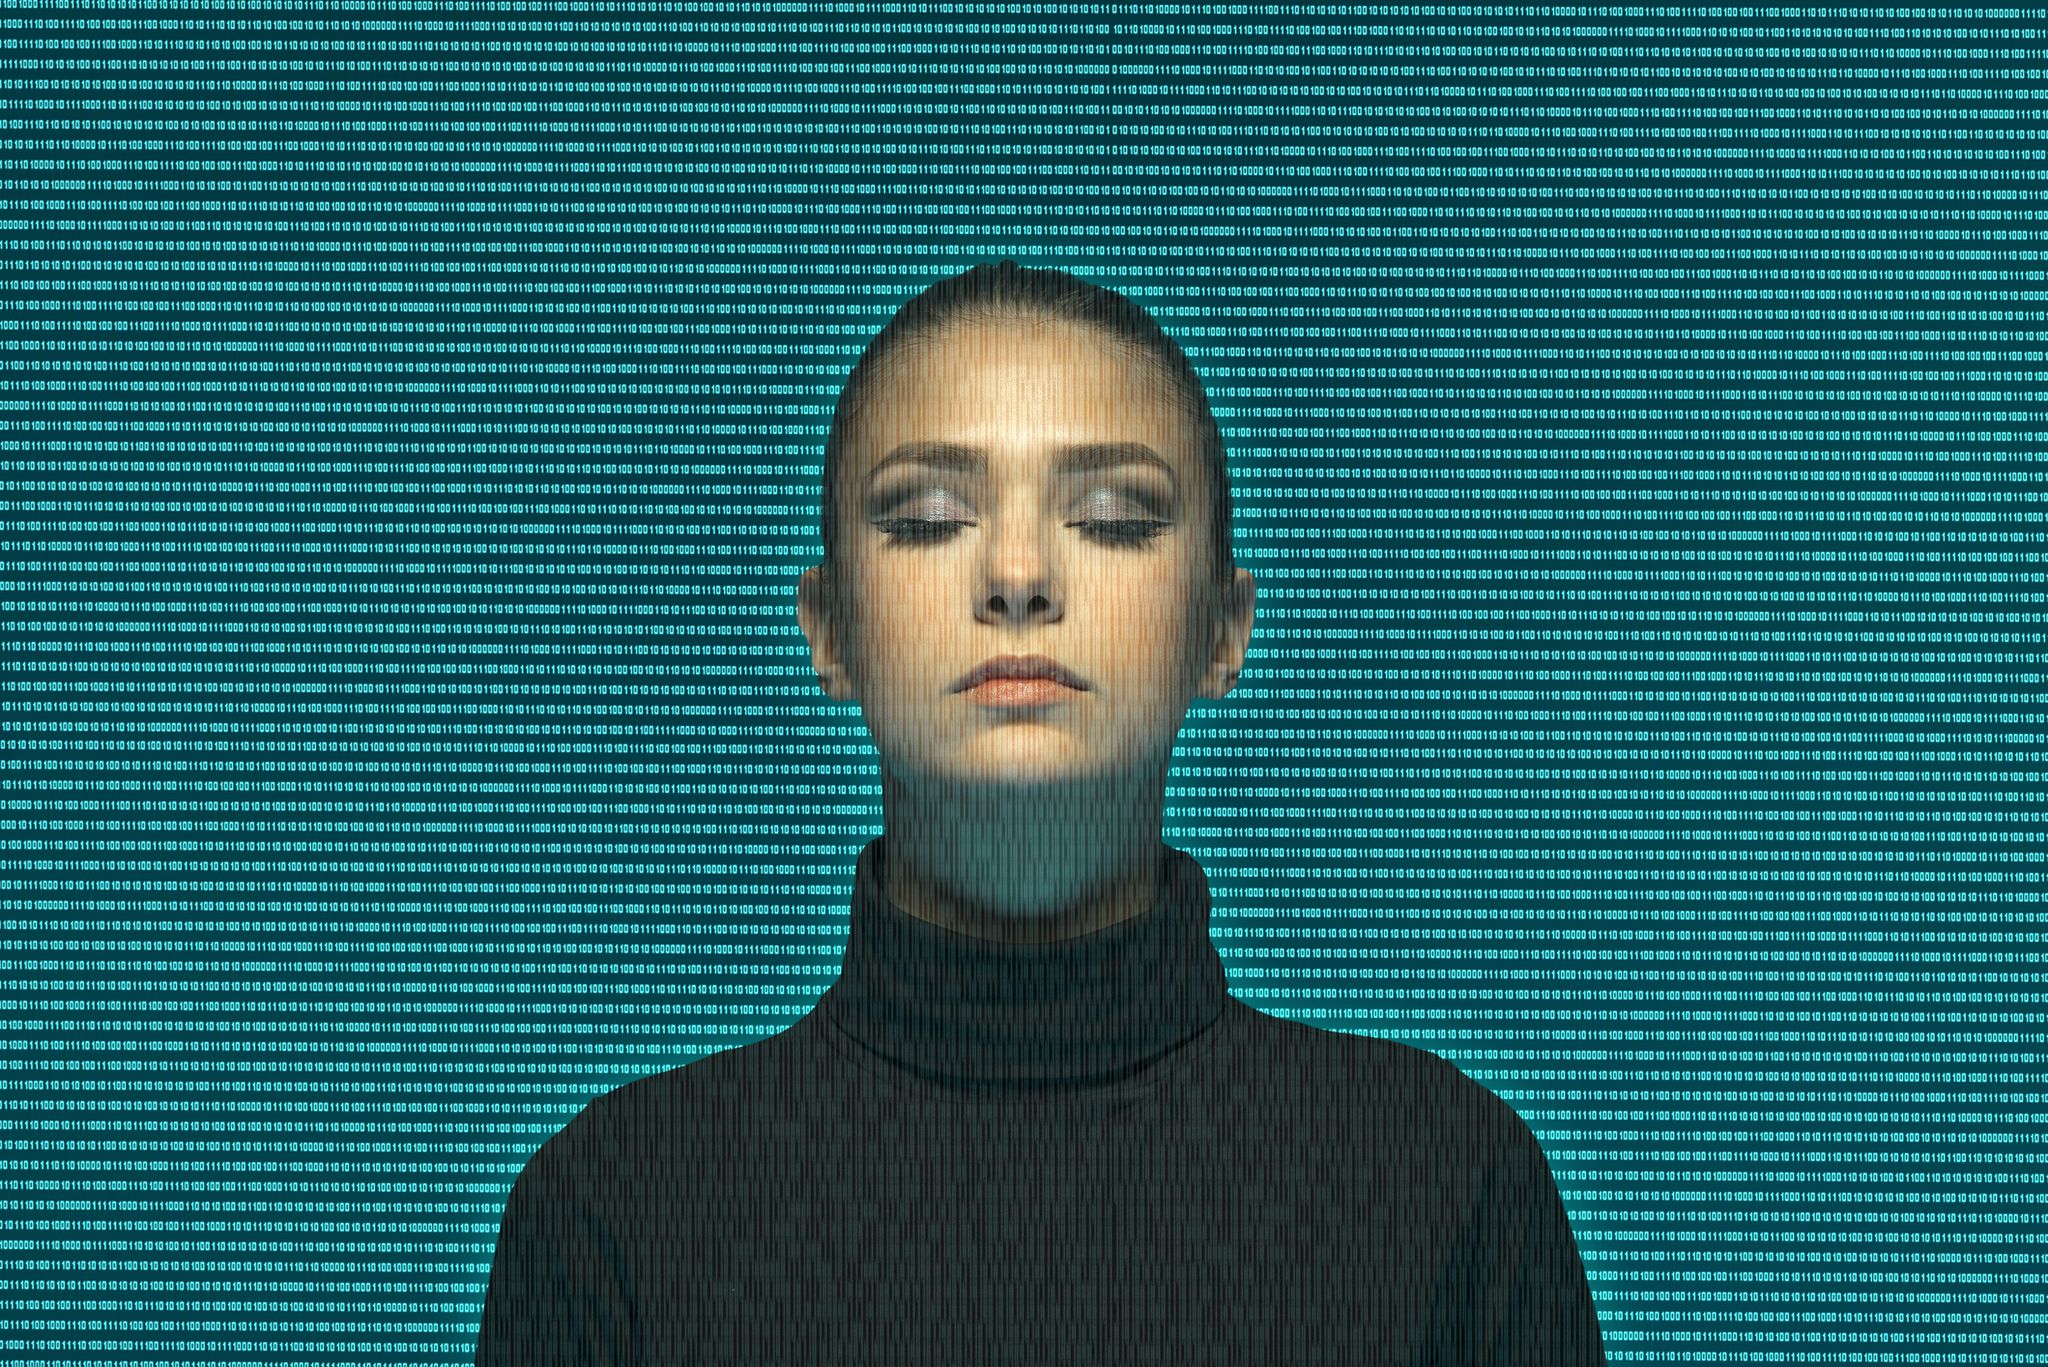 woman seen through a mass of binary numbers